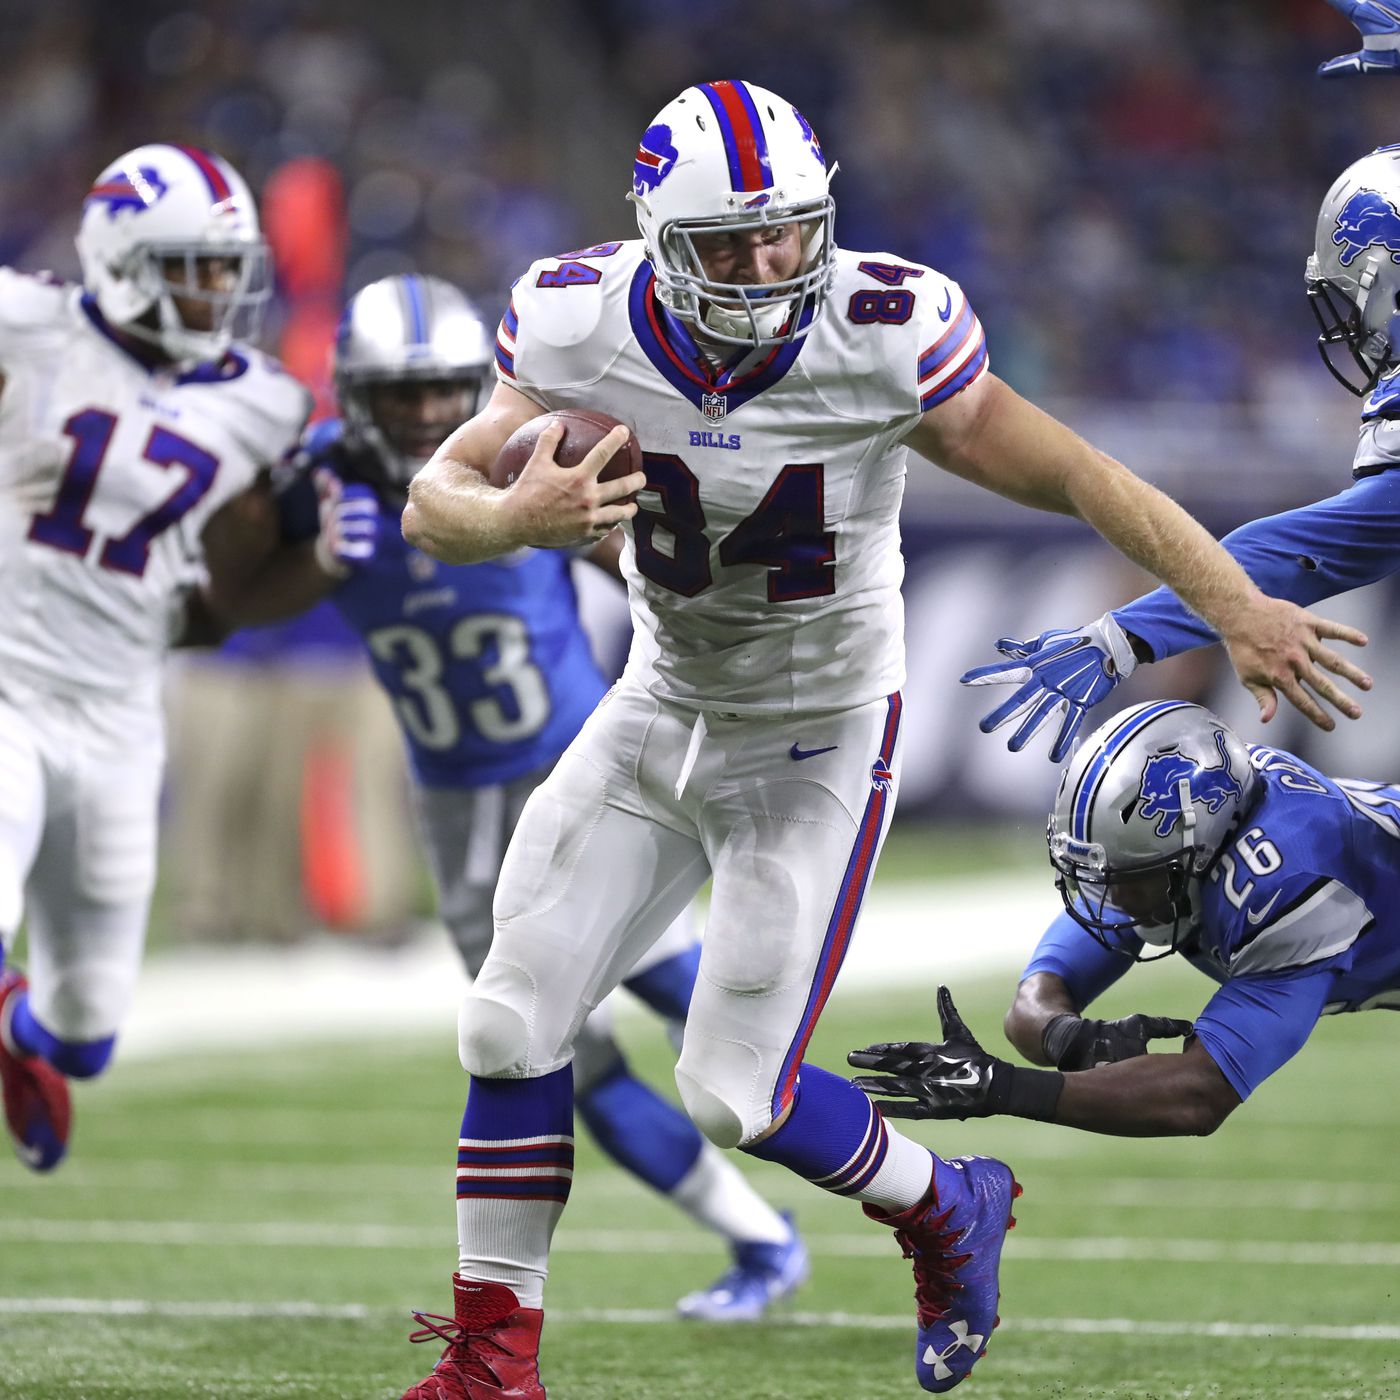 Lions vs Bills: broadcast info, TV channel, announcers, streaming options,  radio - Buffalo Rumblings